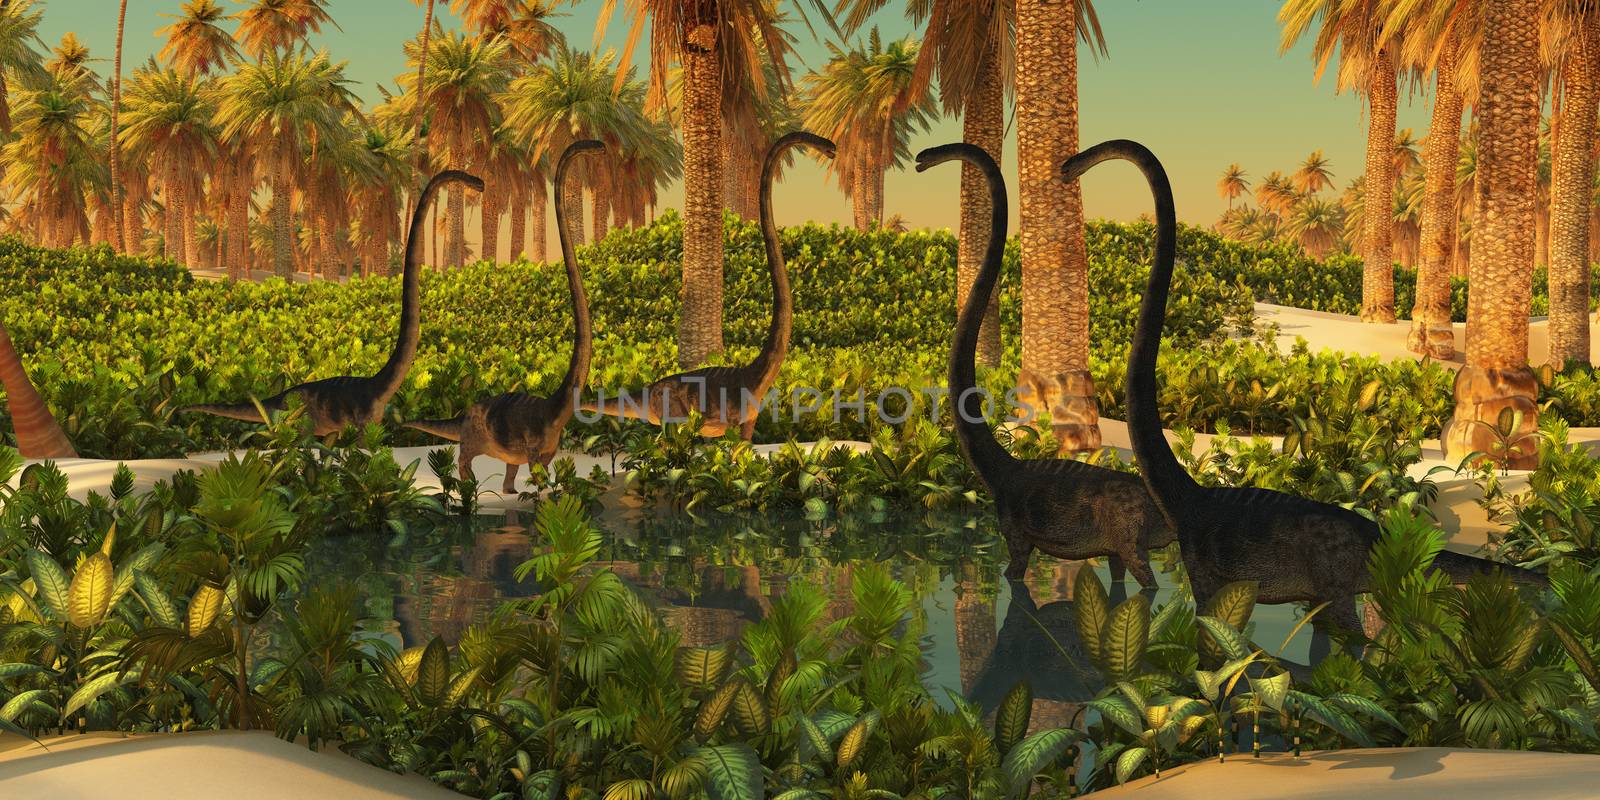 A herd of Omeisaurus dinosaurs use a small Jurassic pond for drinking and bathing.